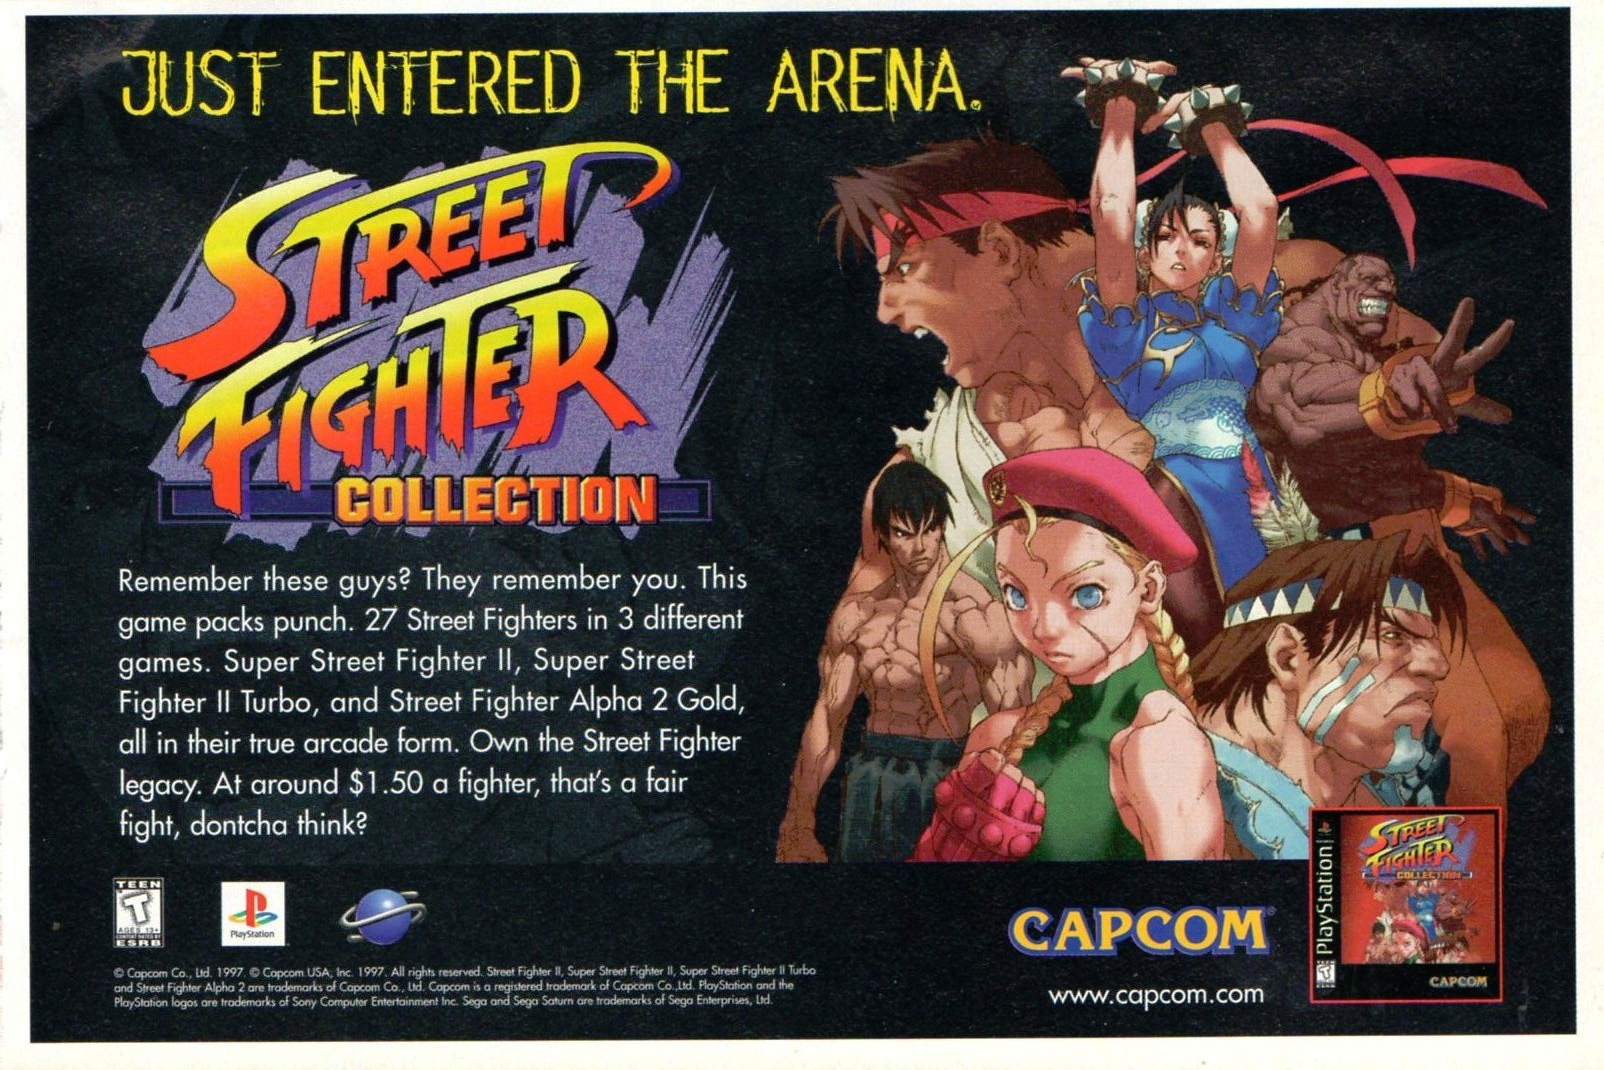 Street Fighter: The Movie (Arcade/Saturn/PS1) - TFG Review